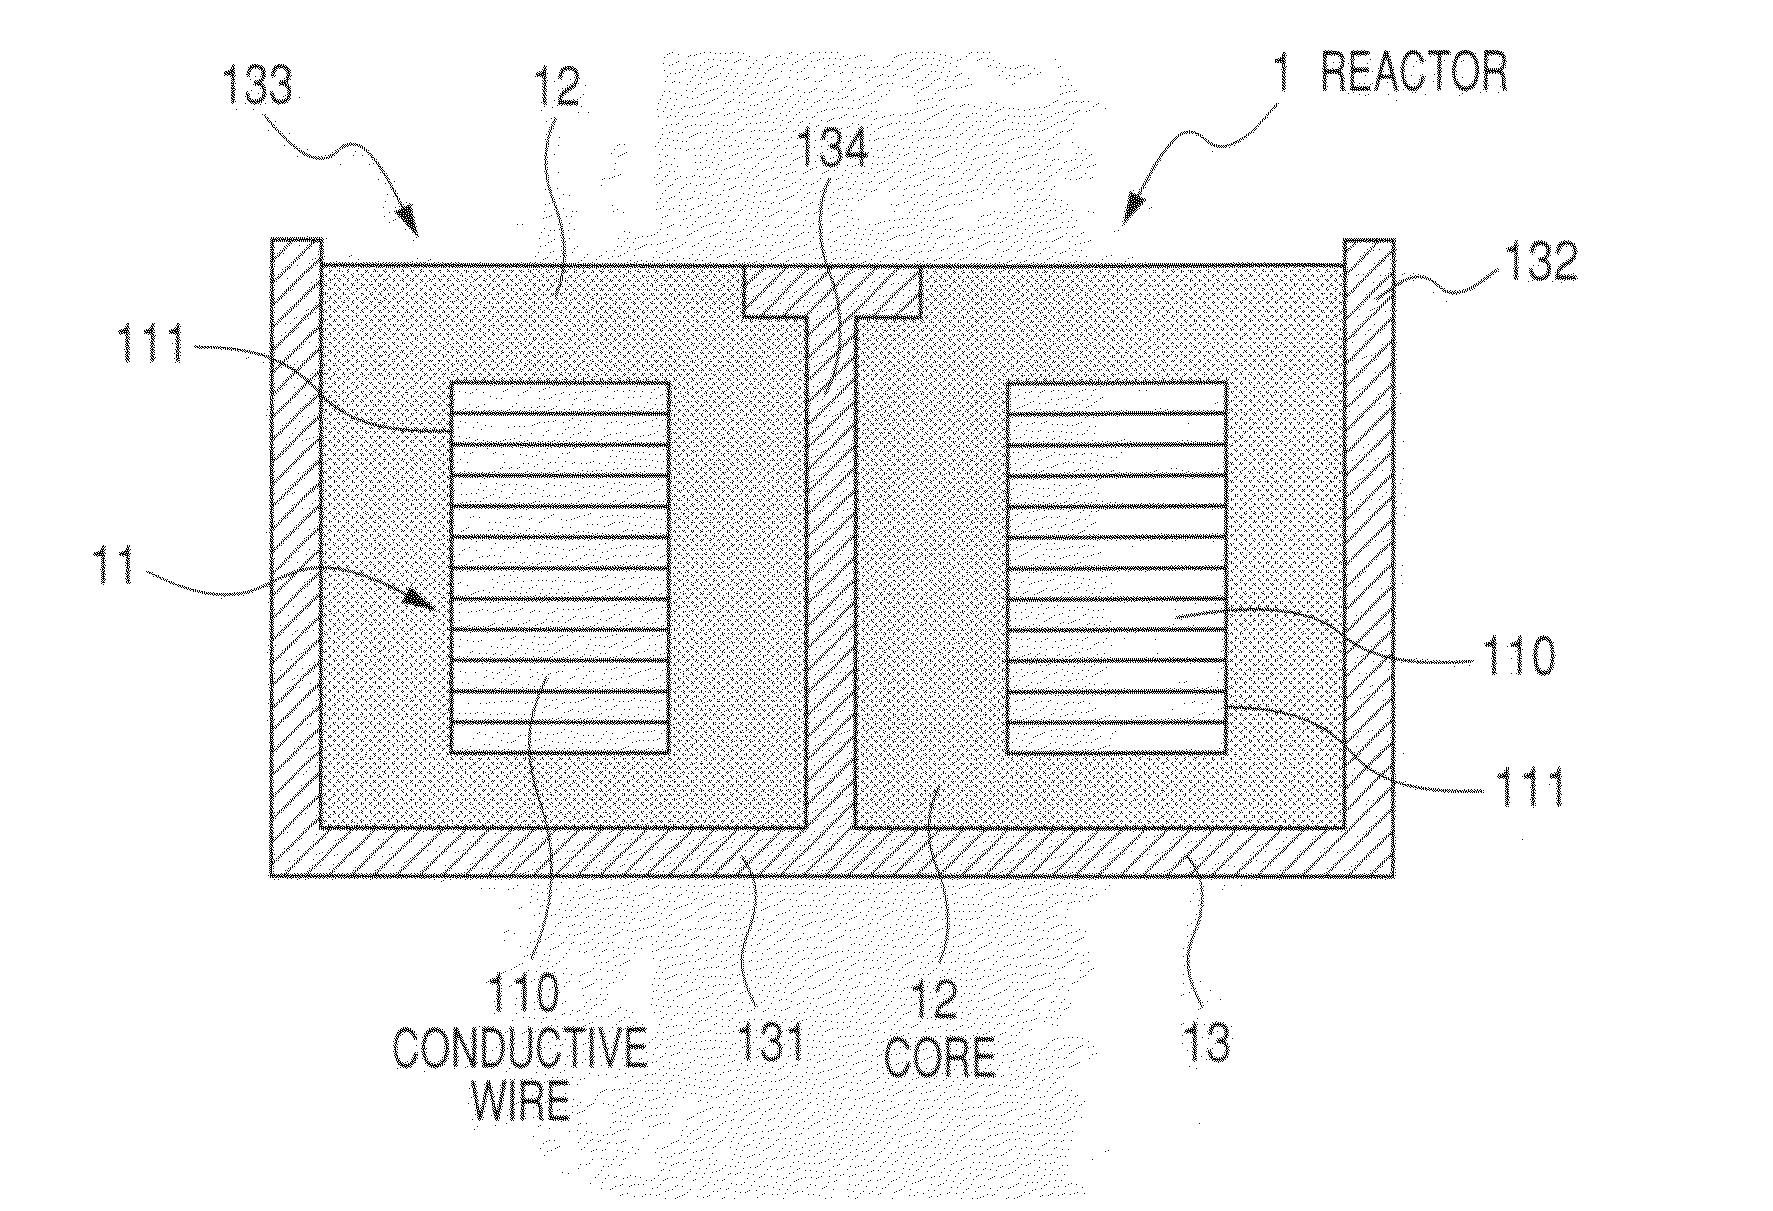 Reactor and method of producing the reactor